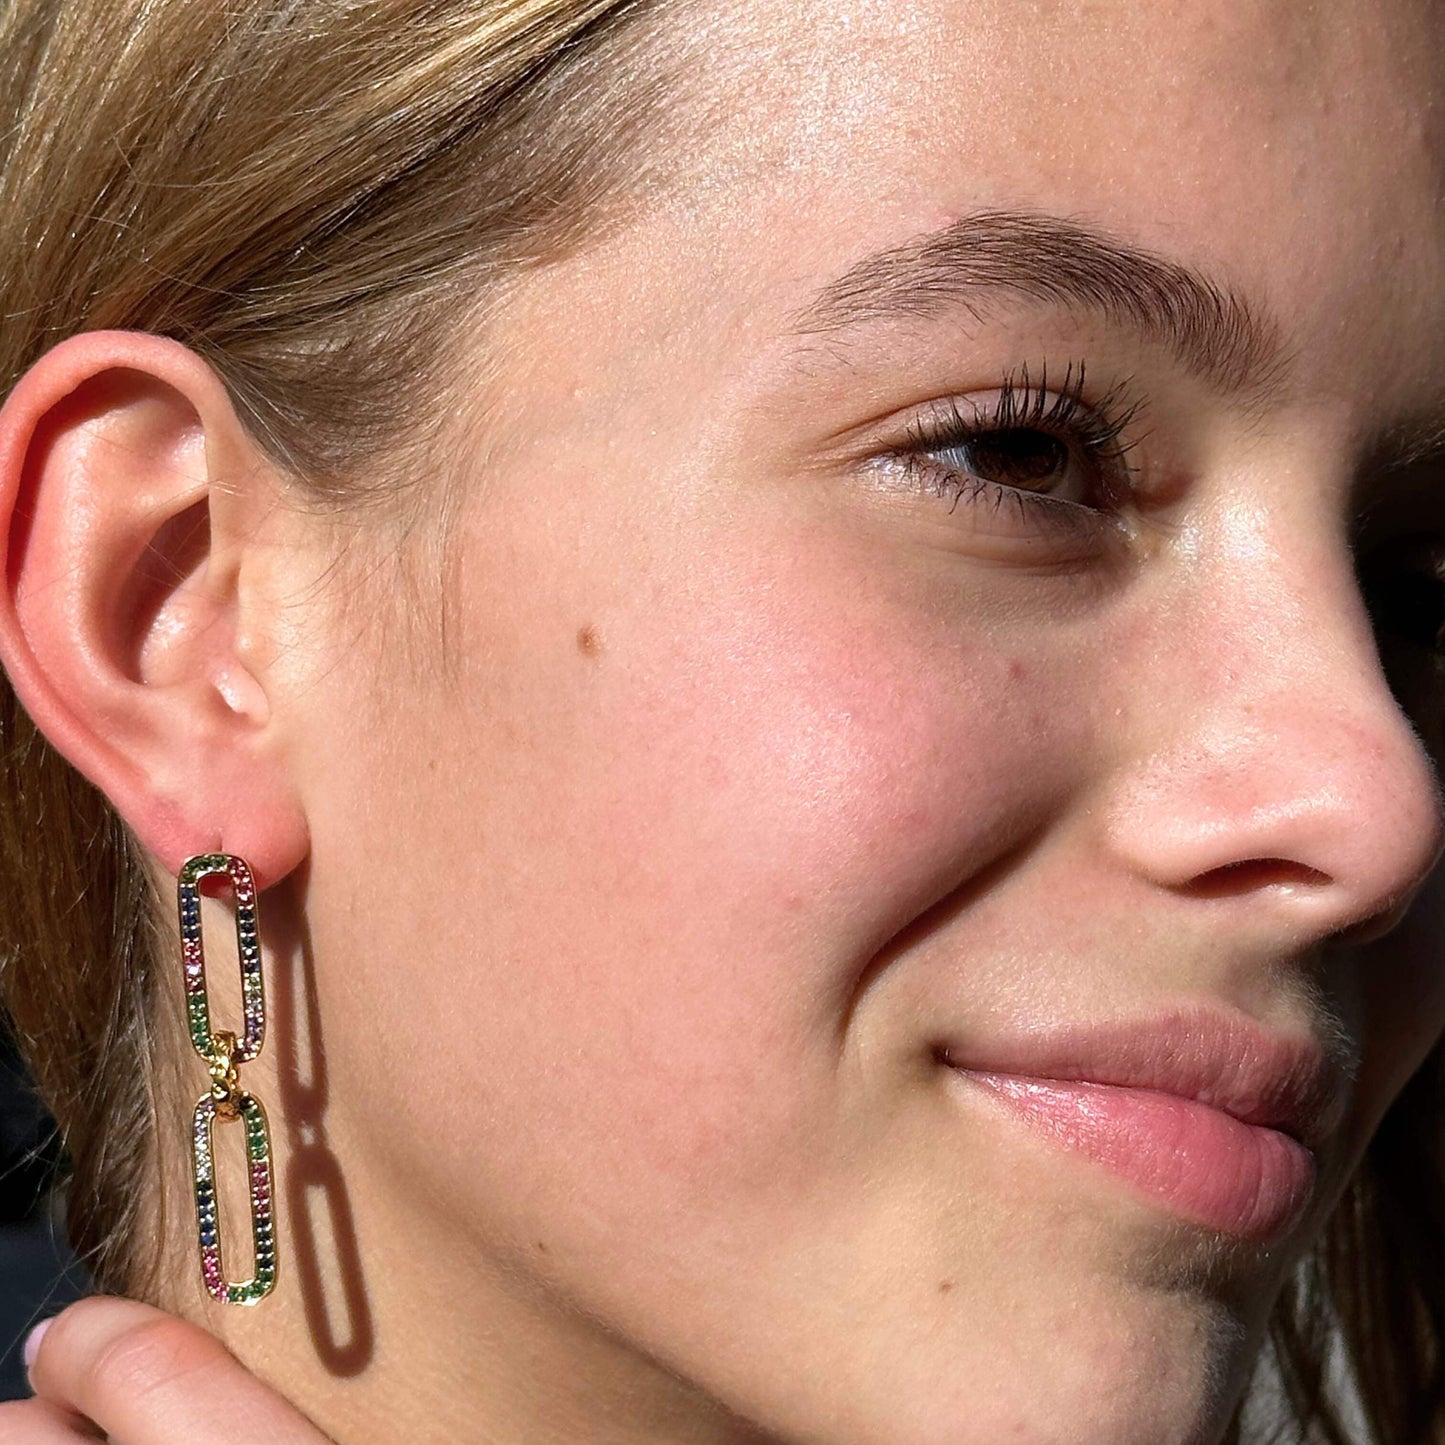 Valerie Gold-plated Statement Earrings